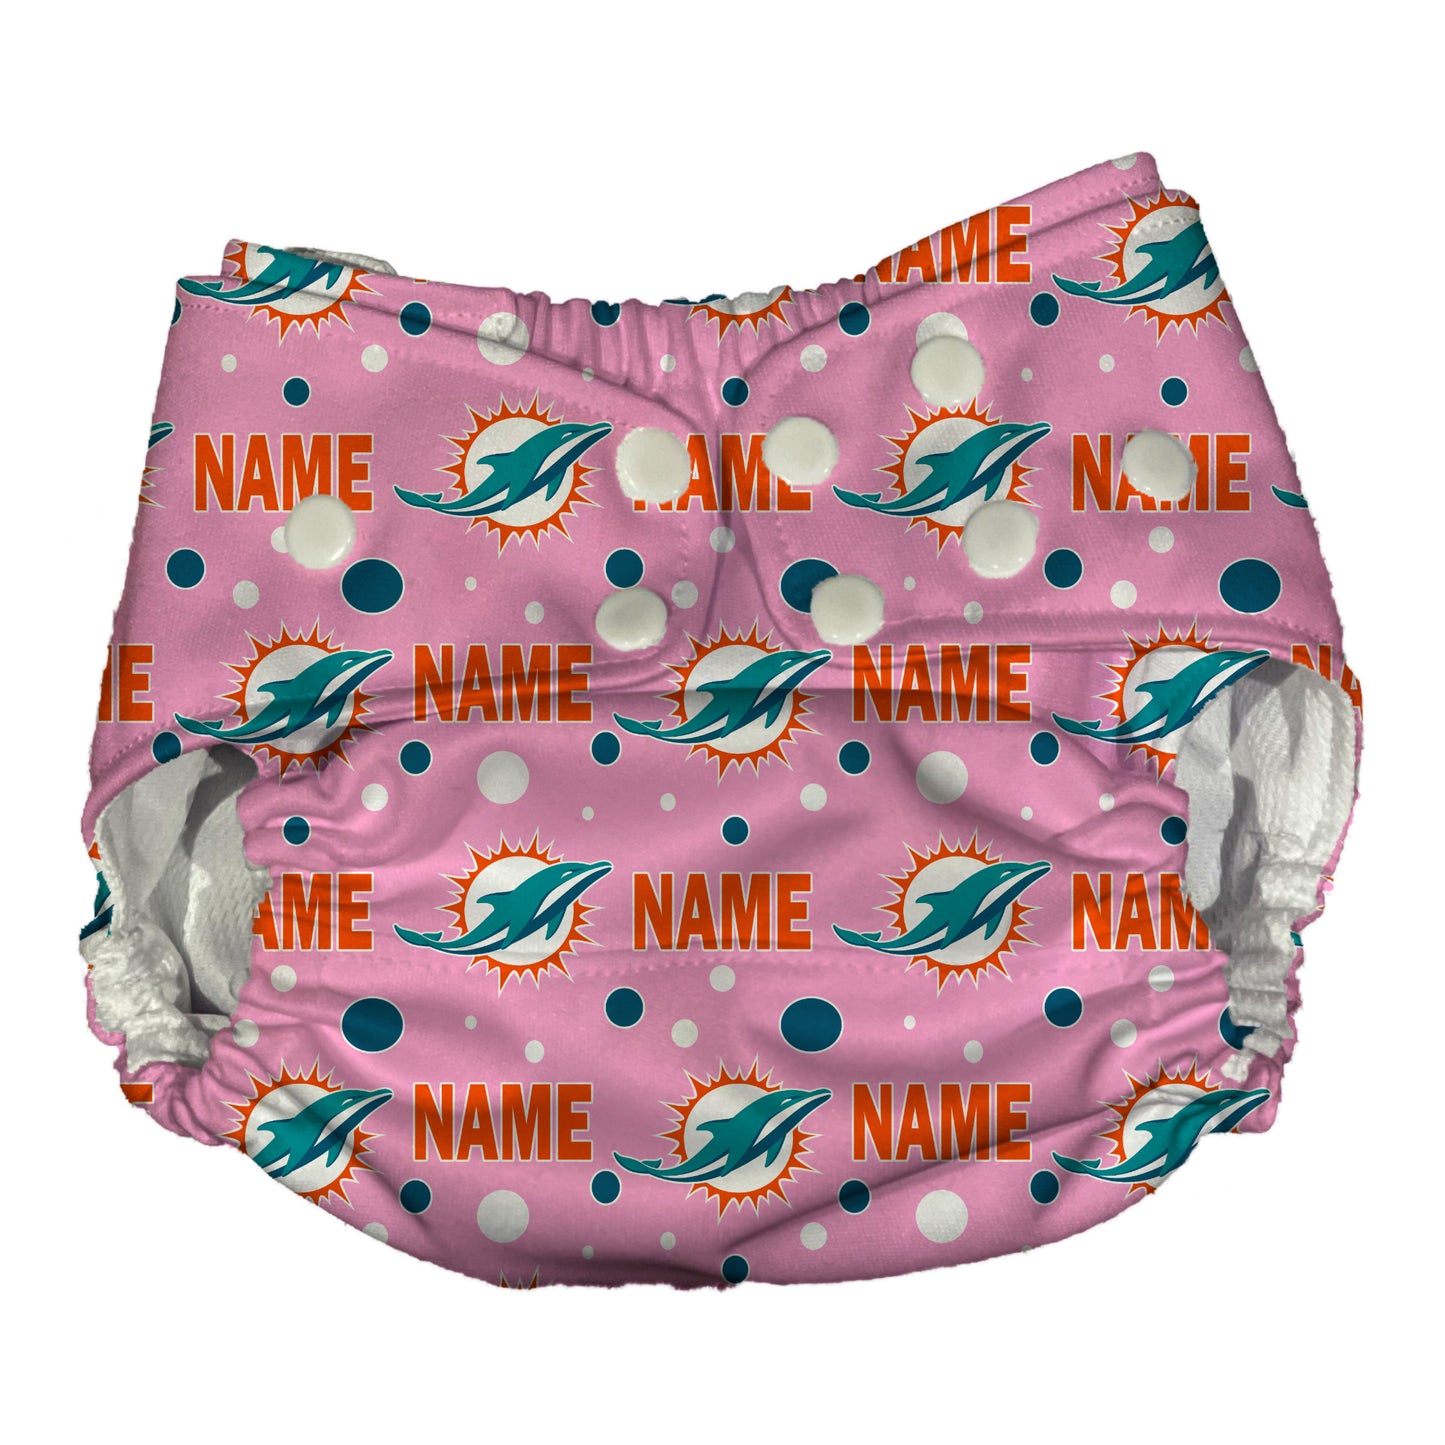 Miami Dolphins Waterproof Diaper Cover | Reusable Swimmer